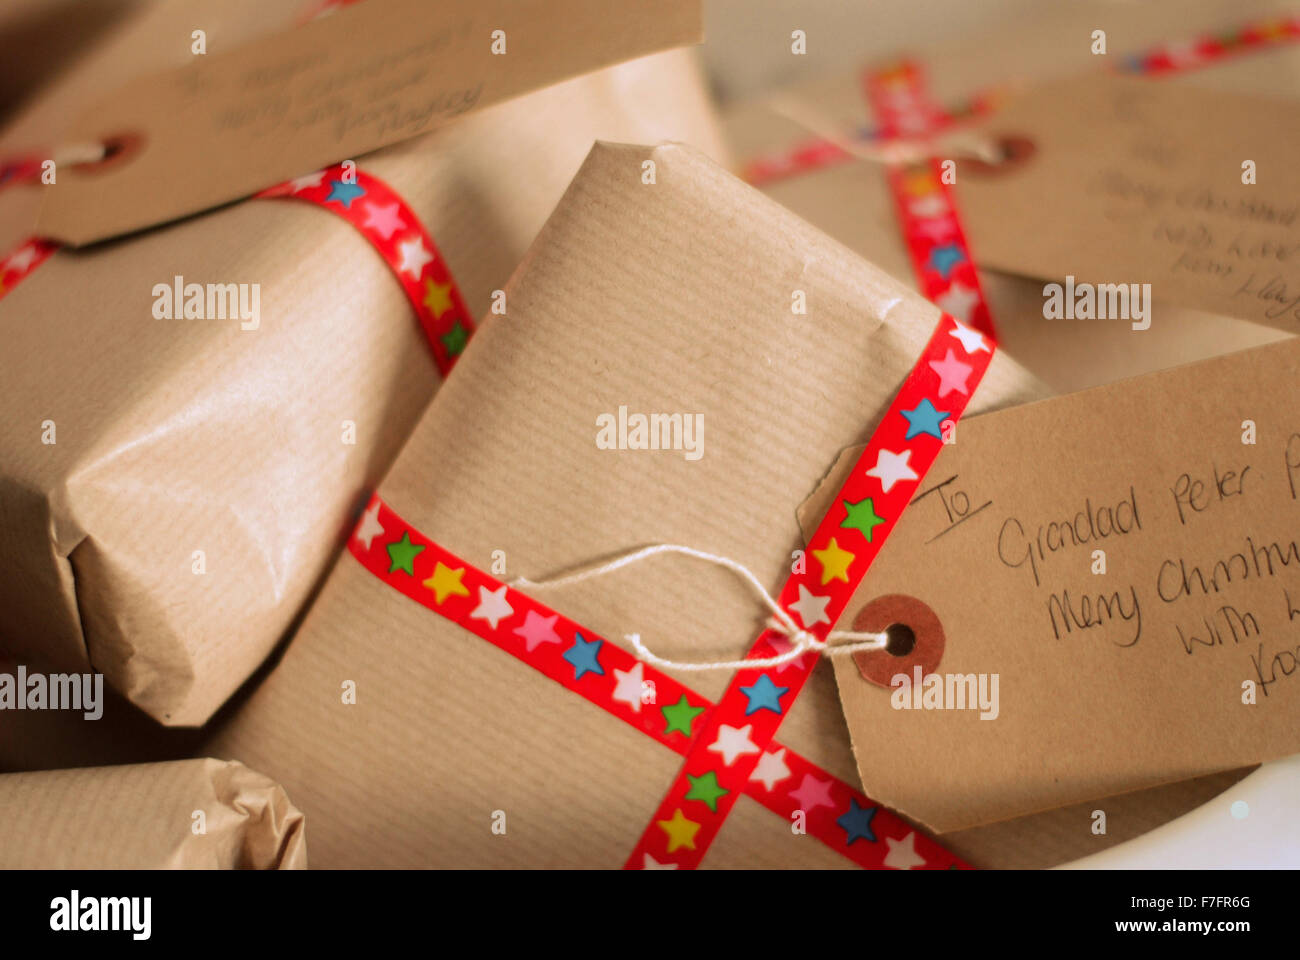 Christmas presents wrapped in brown paper with festive ribbon and luggage labels Stock Image